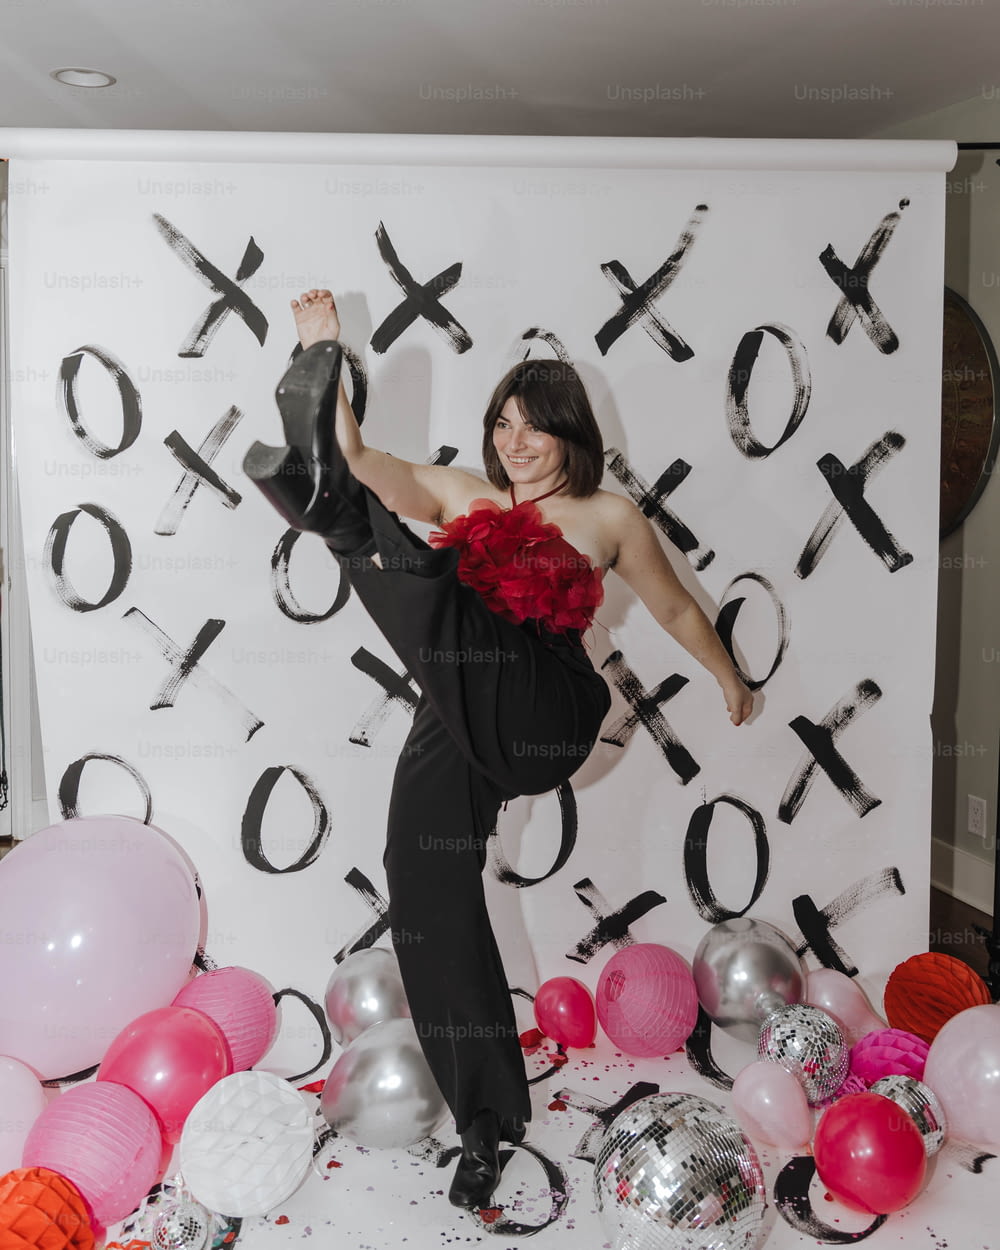 a woman posing in front of a backdrop of balloons